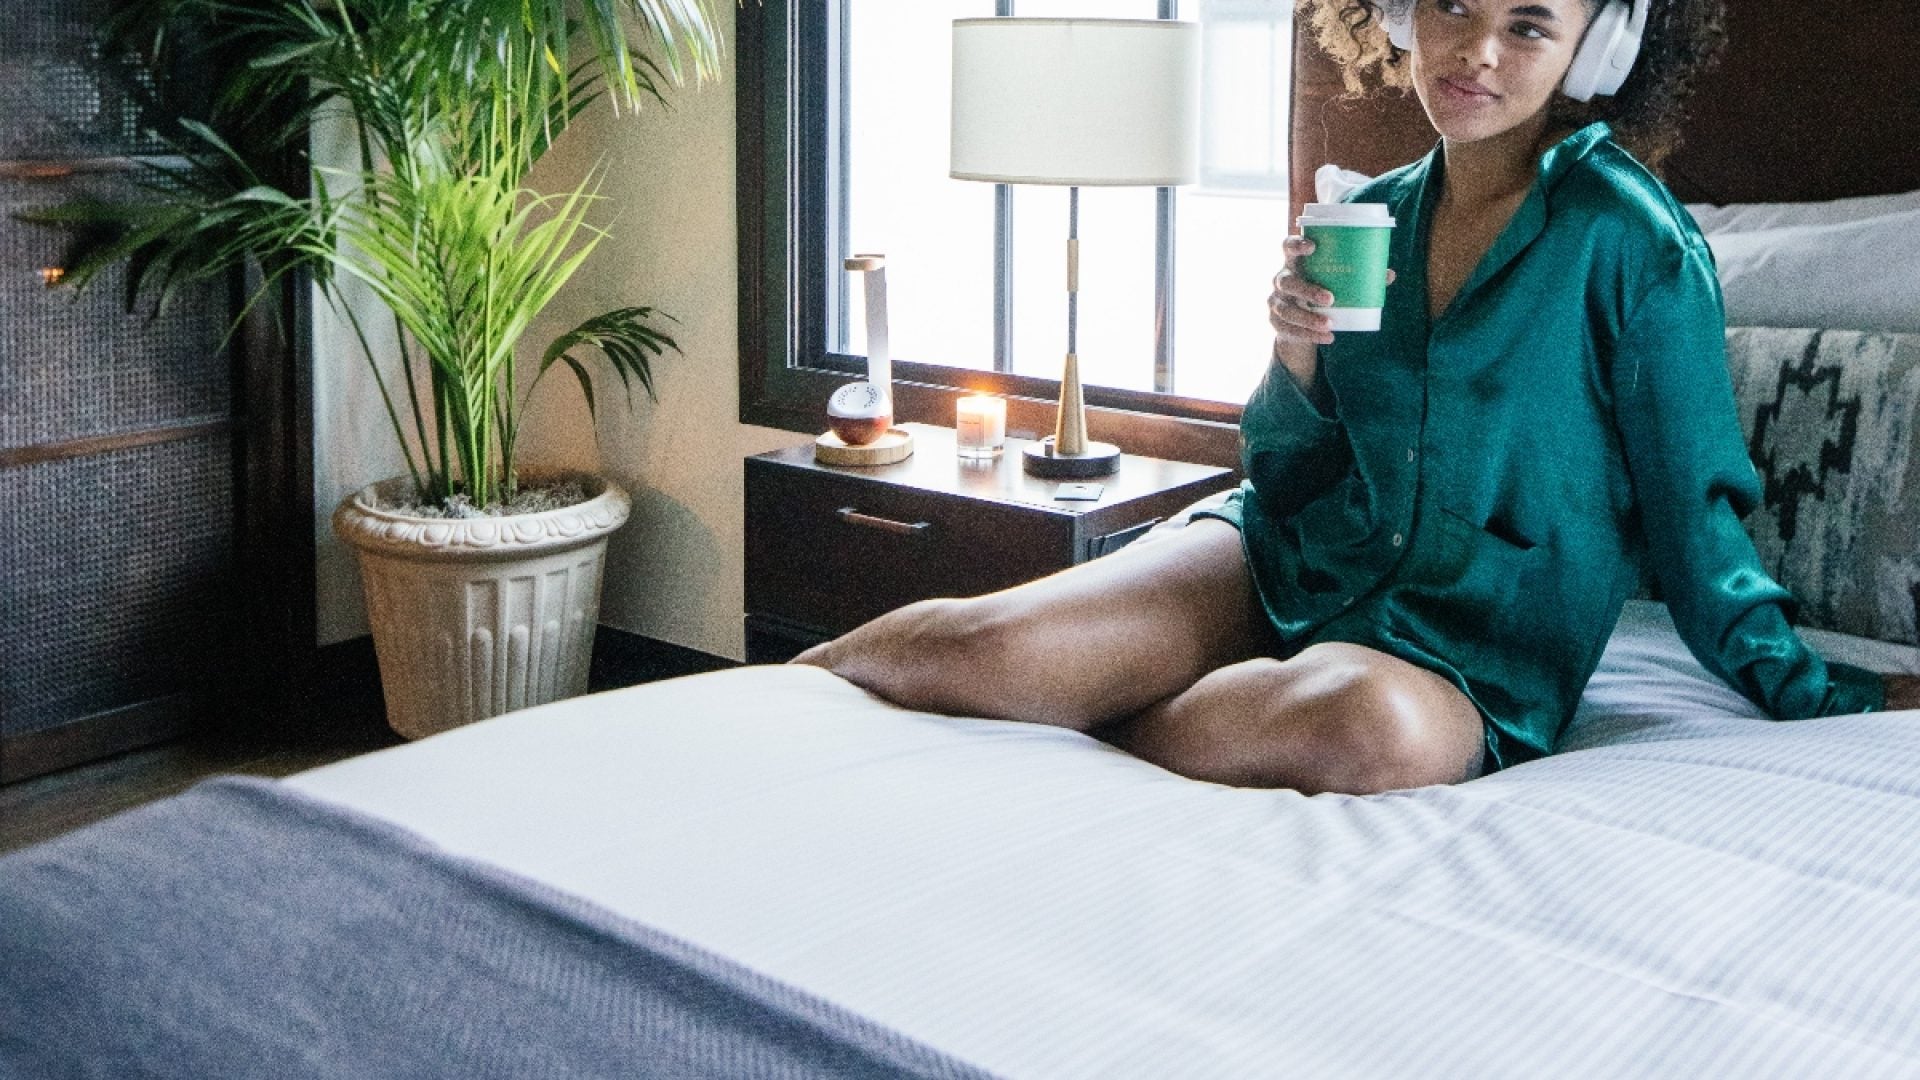 The H.E.R. Suite At Hotel Figueroa Offers The Ultimate Self-Care Stay For Women